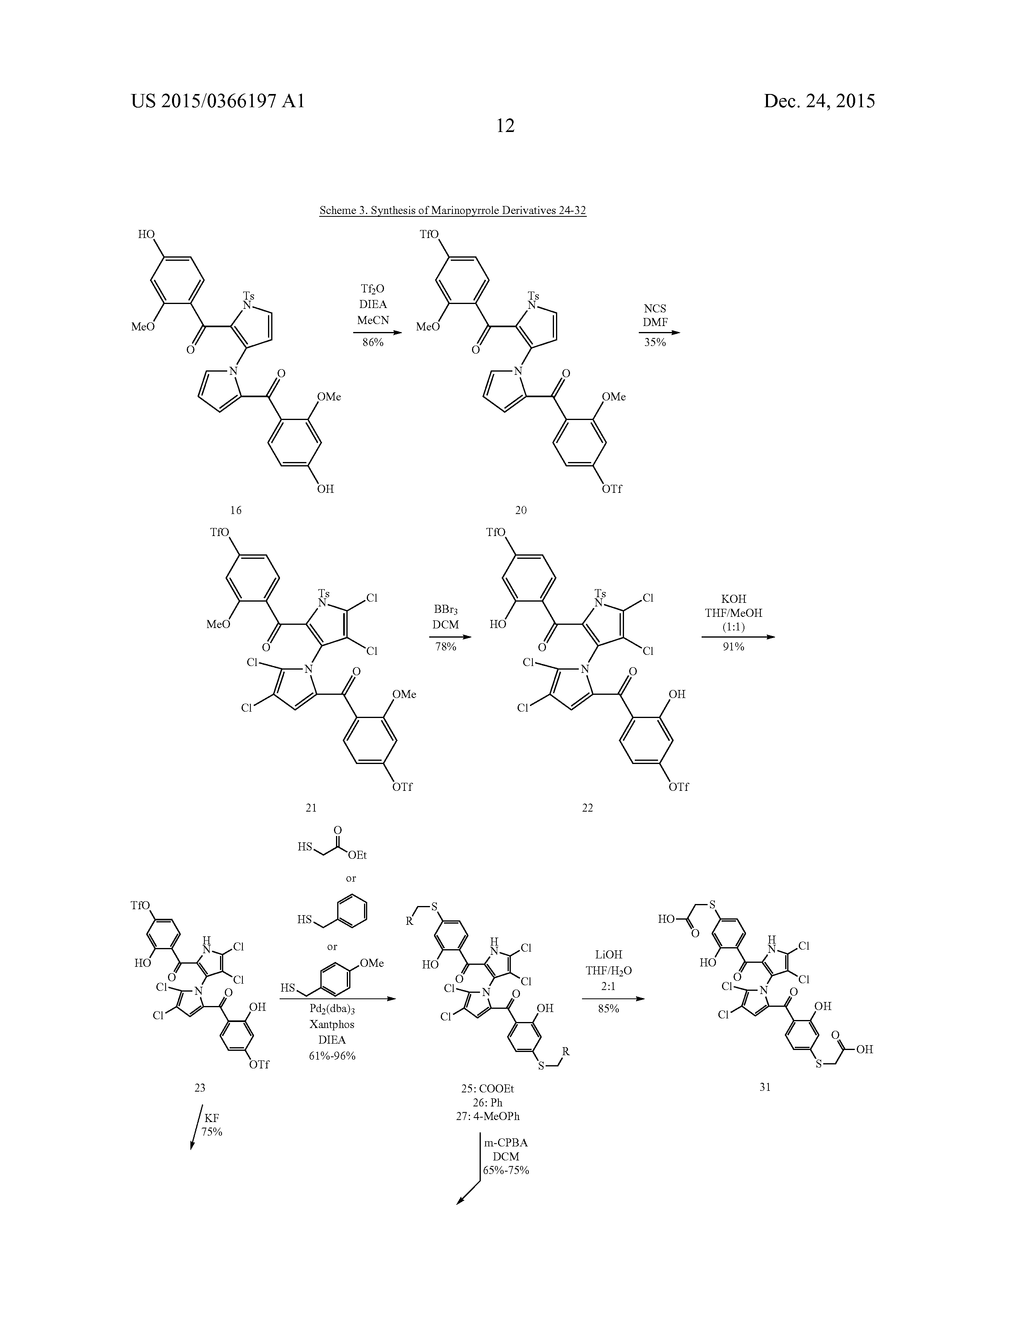 SYMMETRICAL MARINOPYRROLE DERIVATIVES AS POTENTIAL ANTIBIOTIC AGENTS - diagram, schematic, and image 13